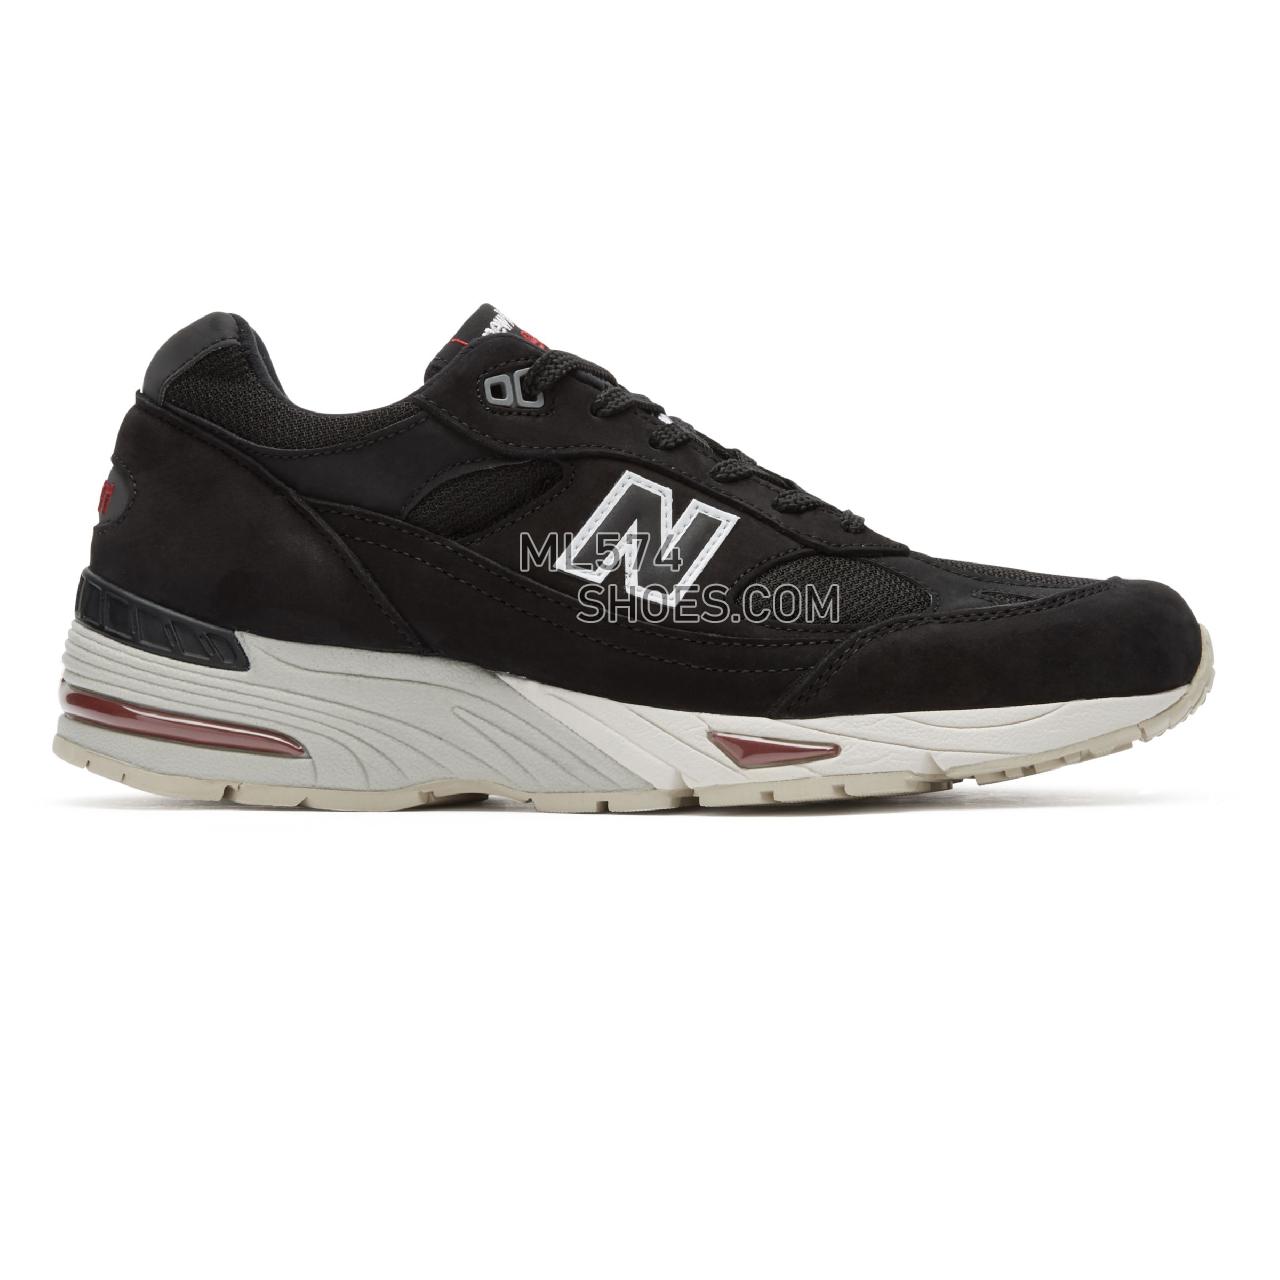 New Balance Made in UK 991 - Men's Made in UK 991 Classic - Black with Red and Grey - M991NKR